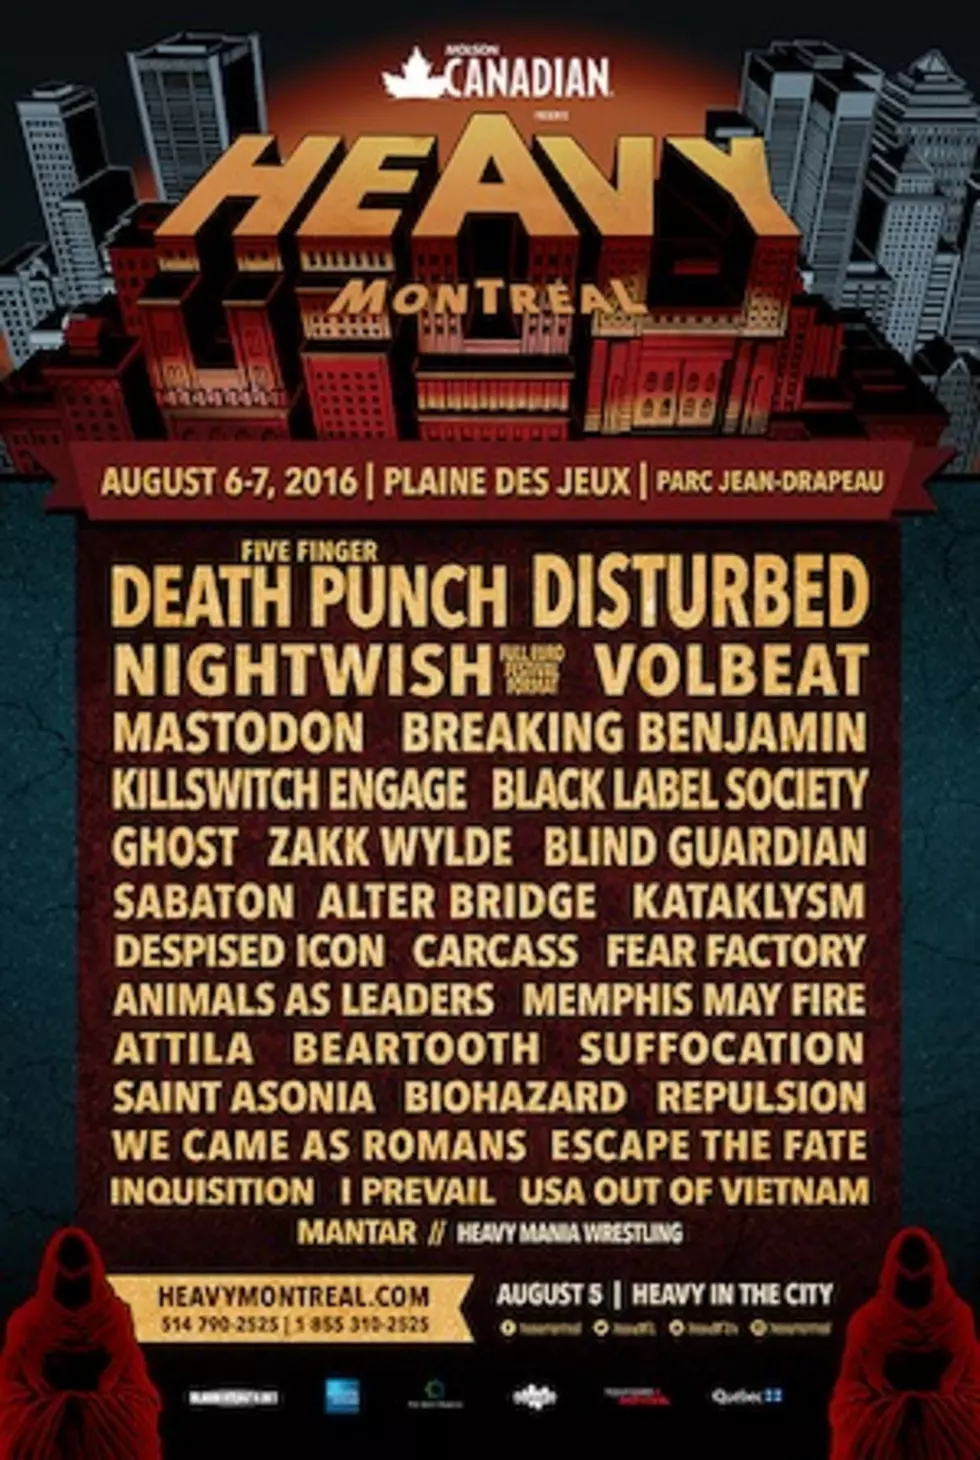 Disturbed, Five Finger Death Punch + More to Rock 2016 Heavy Montreal Festival